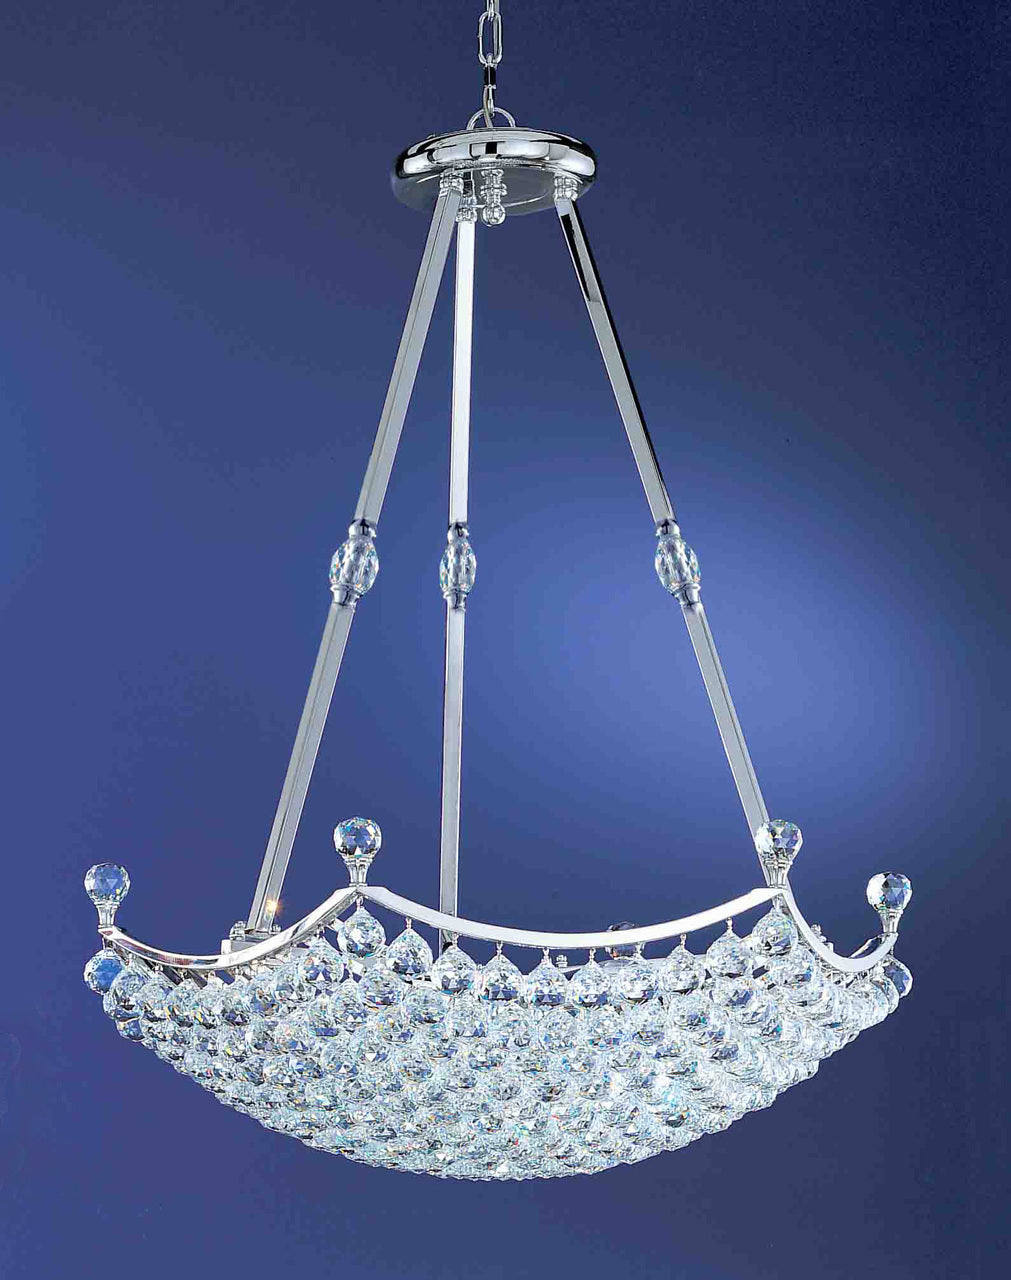 Classic Lighting 69777 CH CP Solitaire Crystal Pendant in Chrome